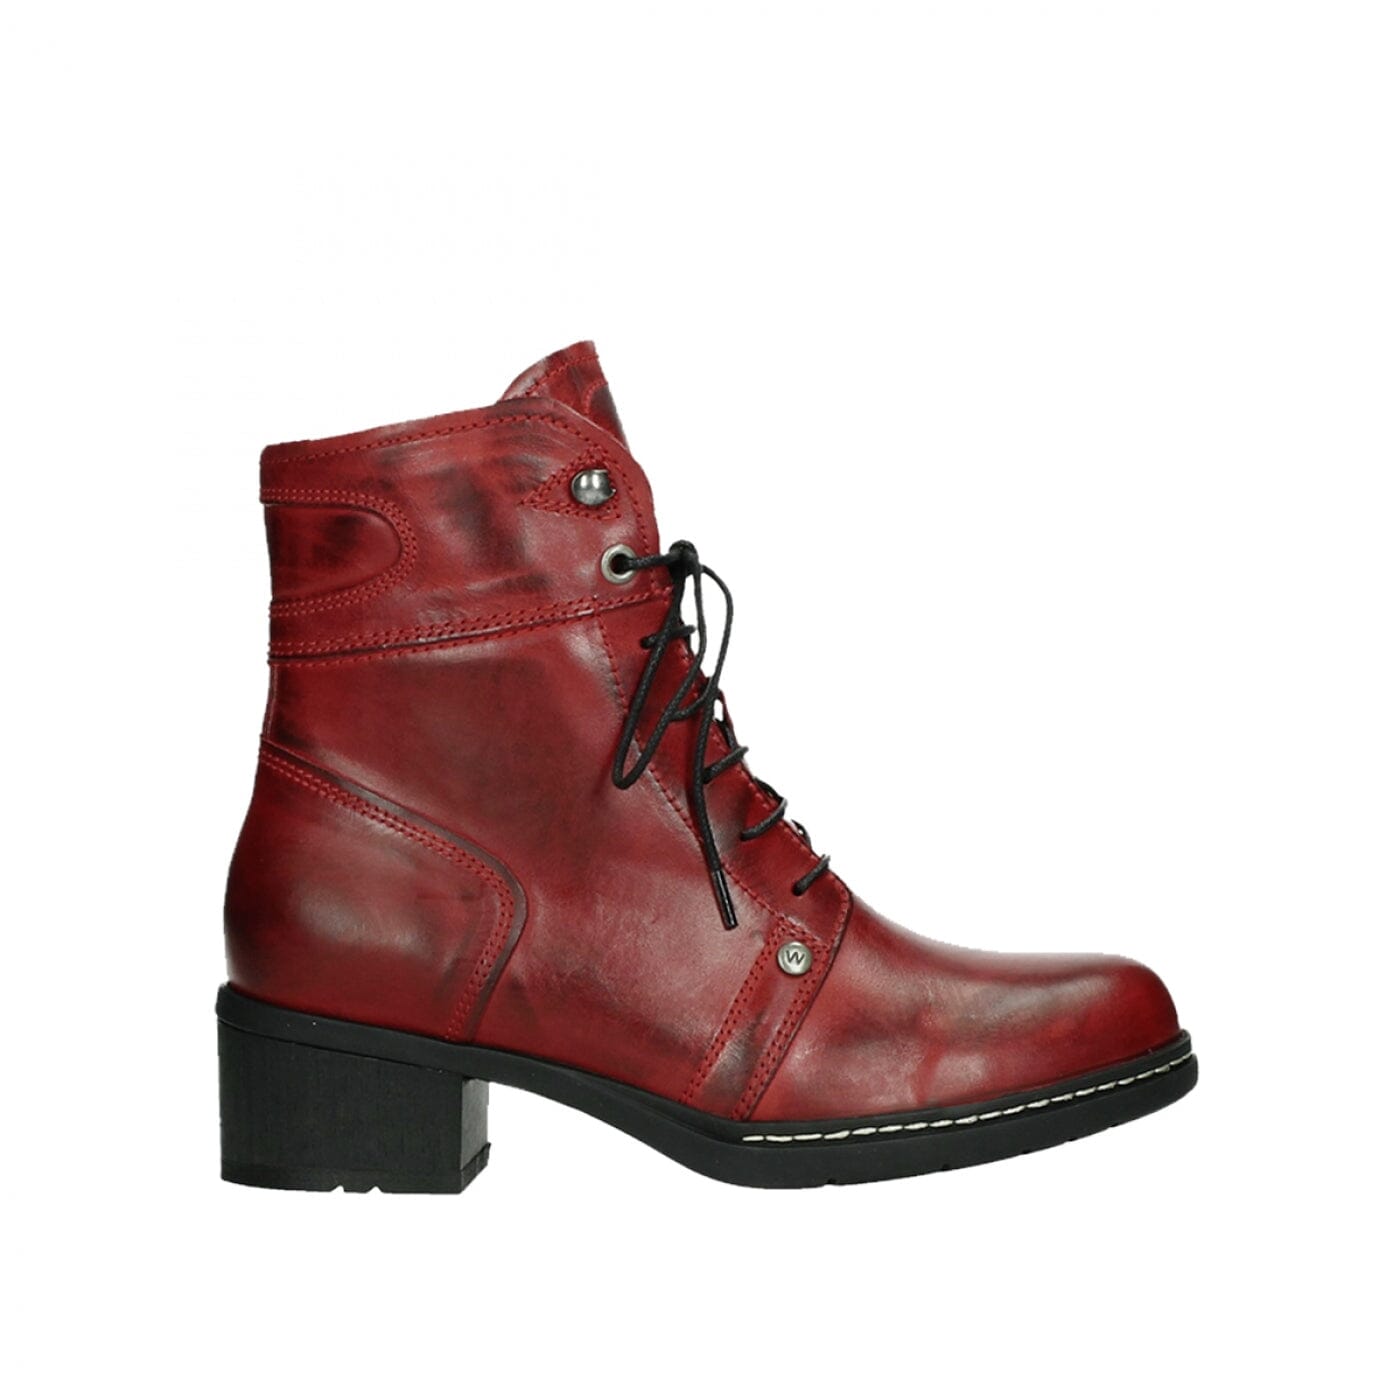 Wolky, Red Deer, Boots, Soft Wax Leather, Dark Red Boots Wolky Dark Red 37 